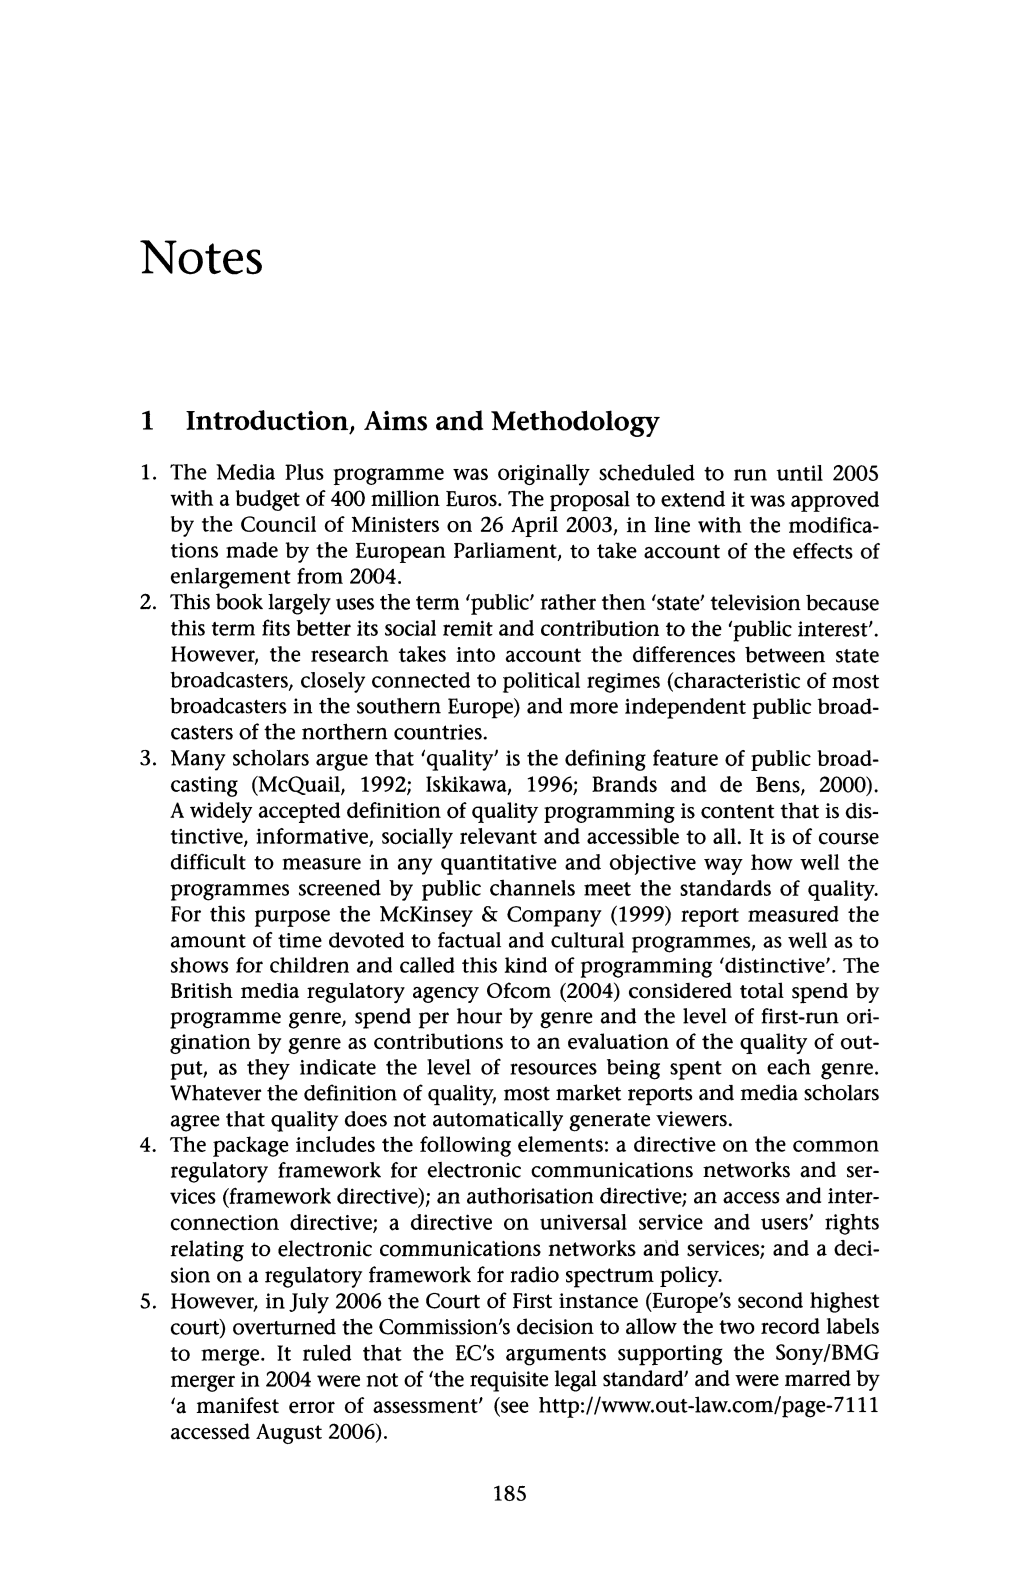 1 Introduction, Aims and Methodology